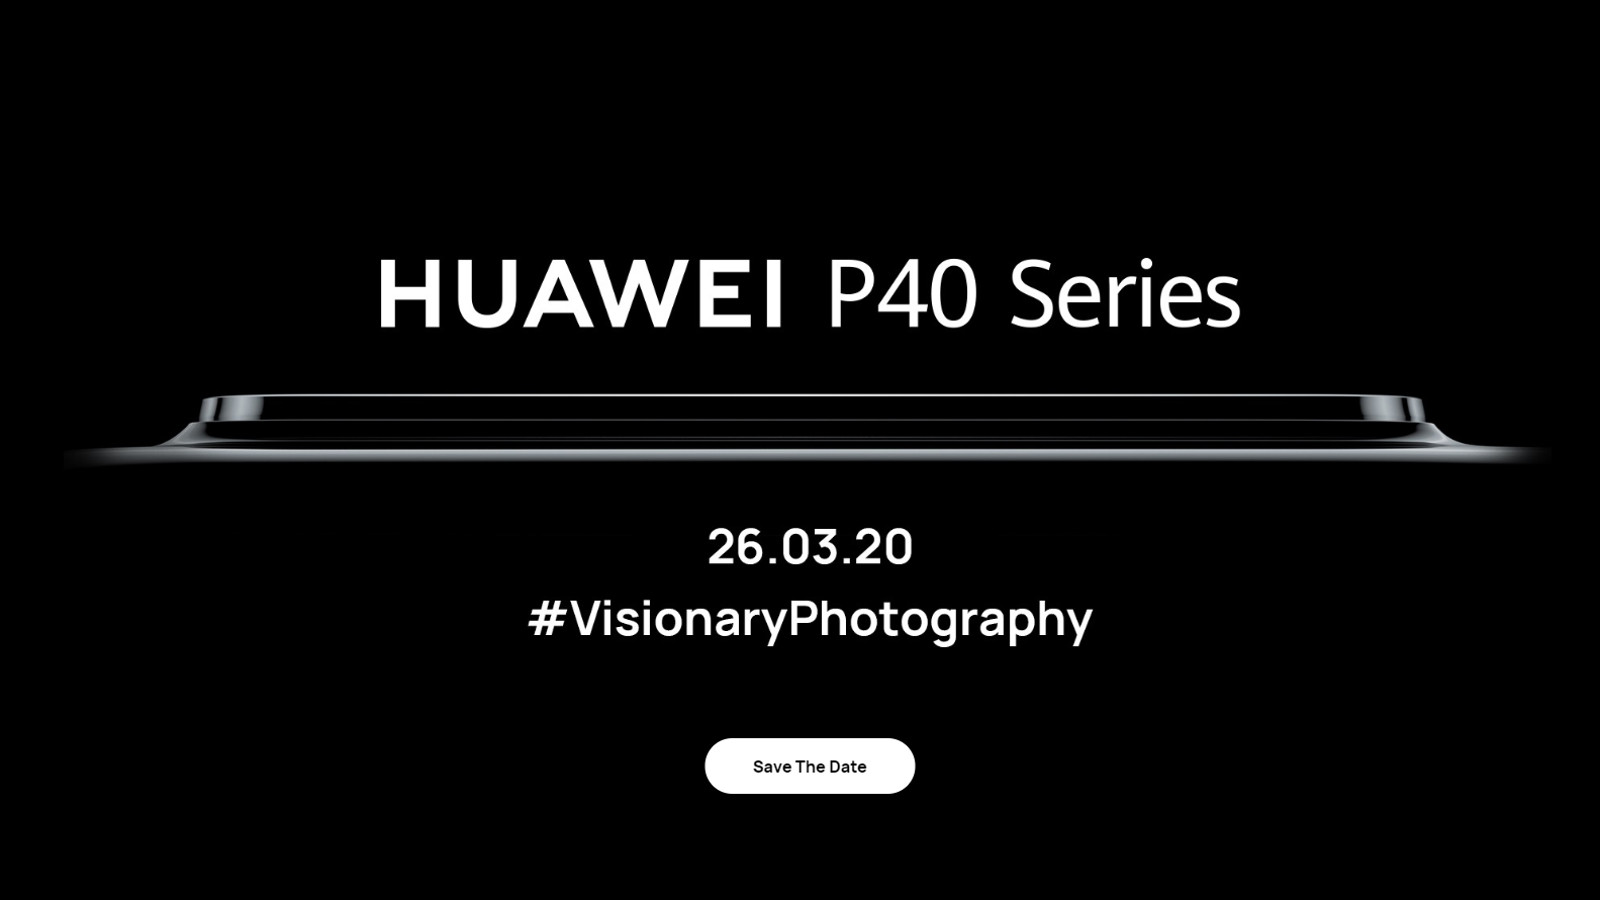 huawei-p40-series-launch-event (1)